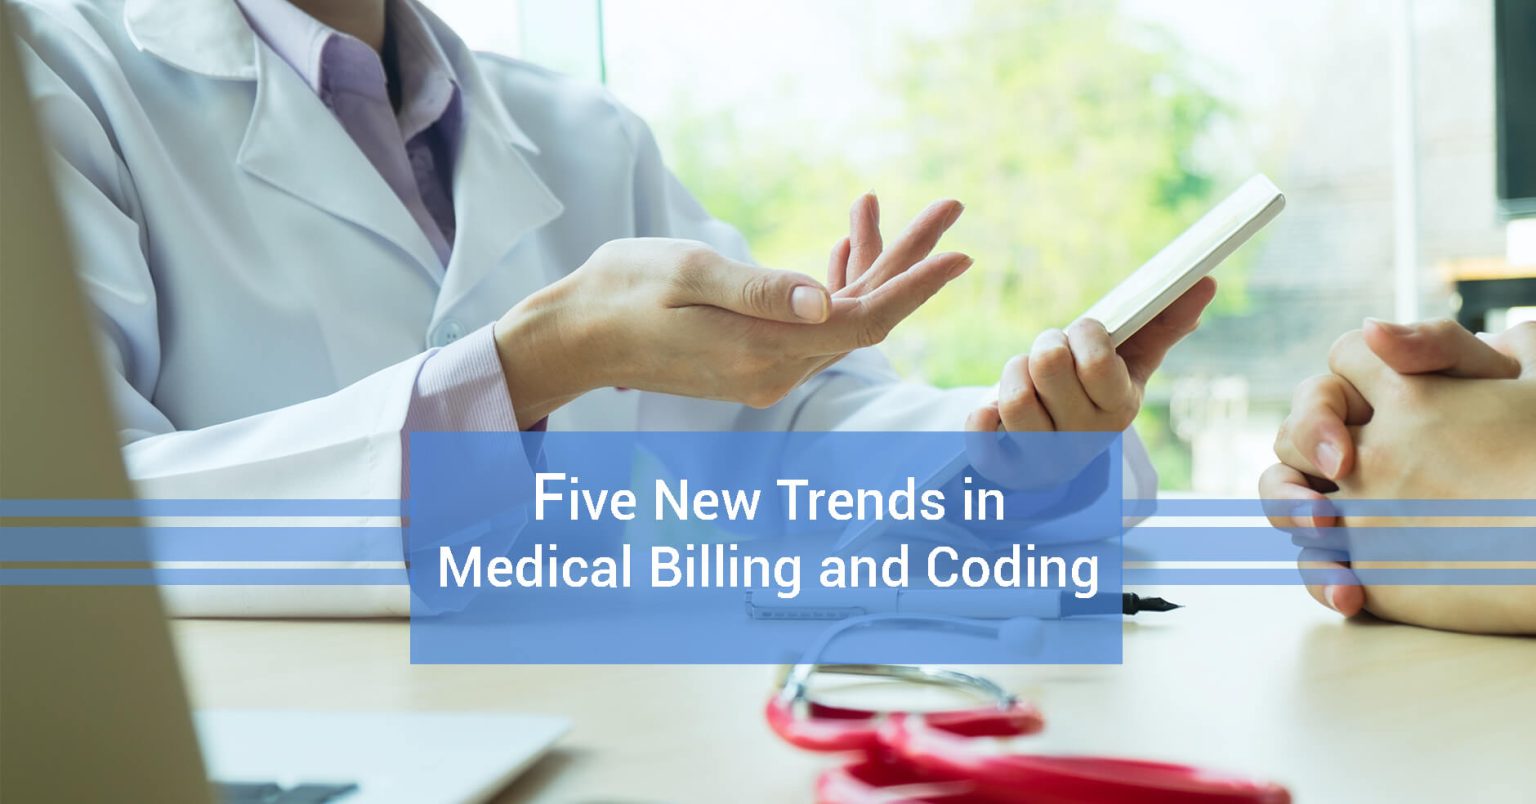 Five New Trends in Medical Billing and Coding